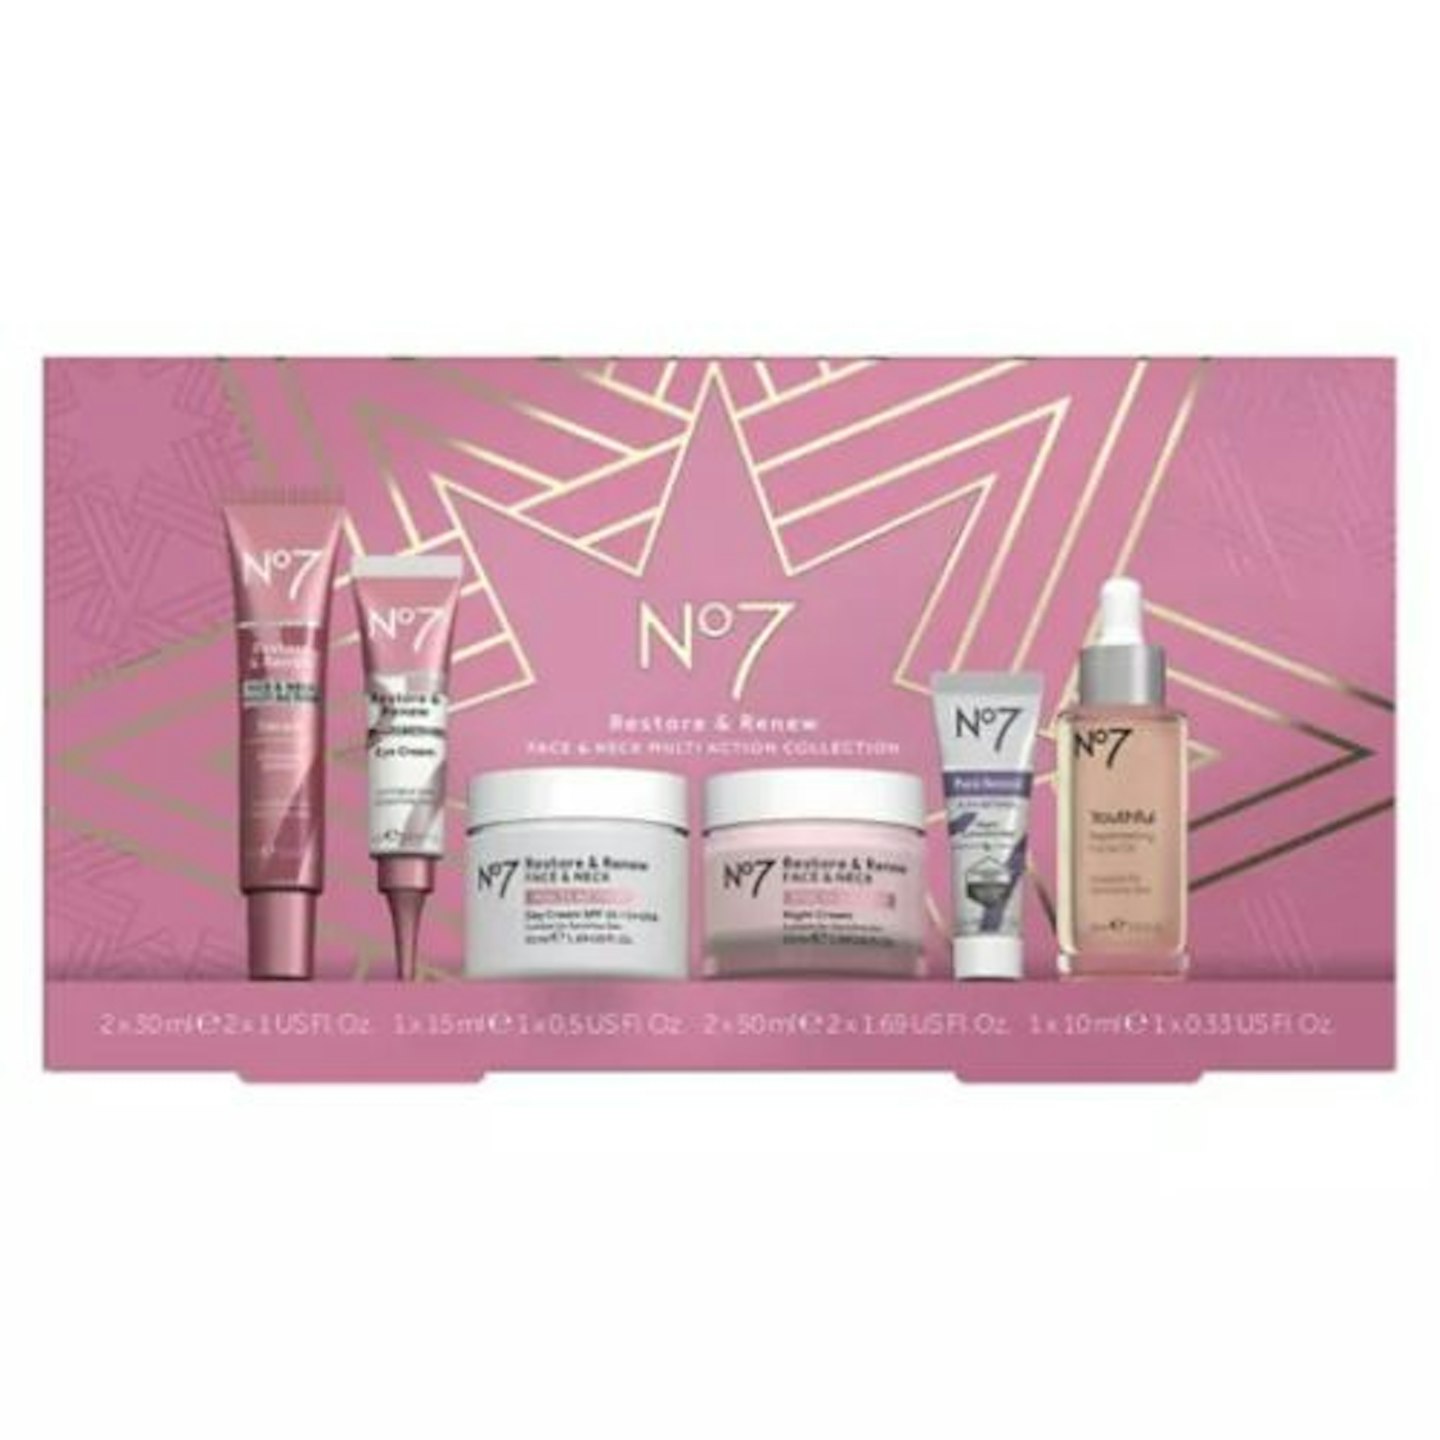 No7 Restore and Renew Face & Neck Multi Action Collection 6 Piece Set